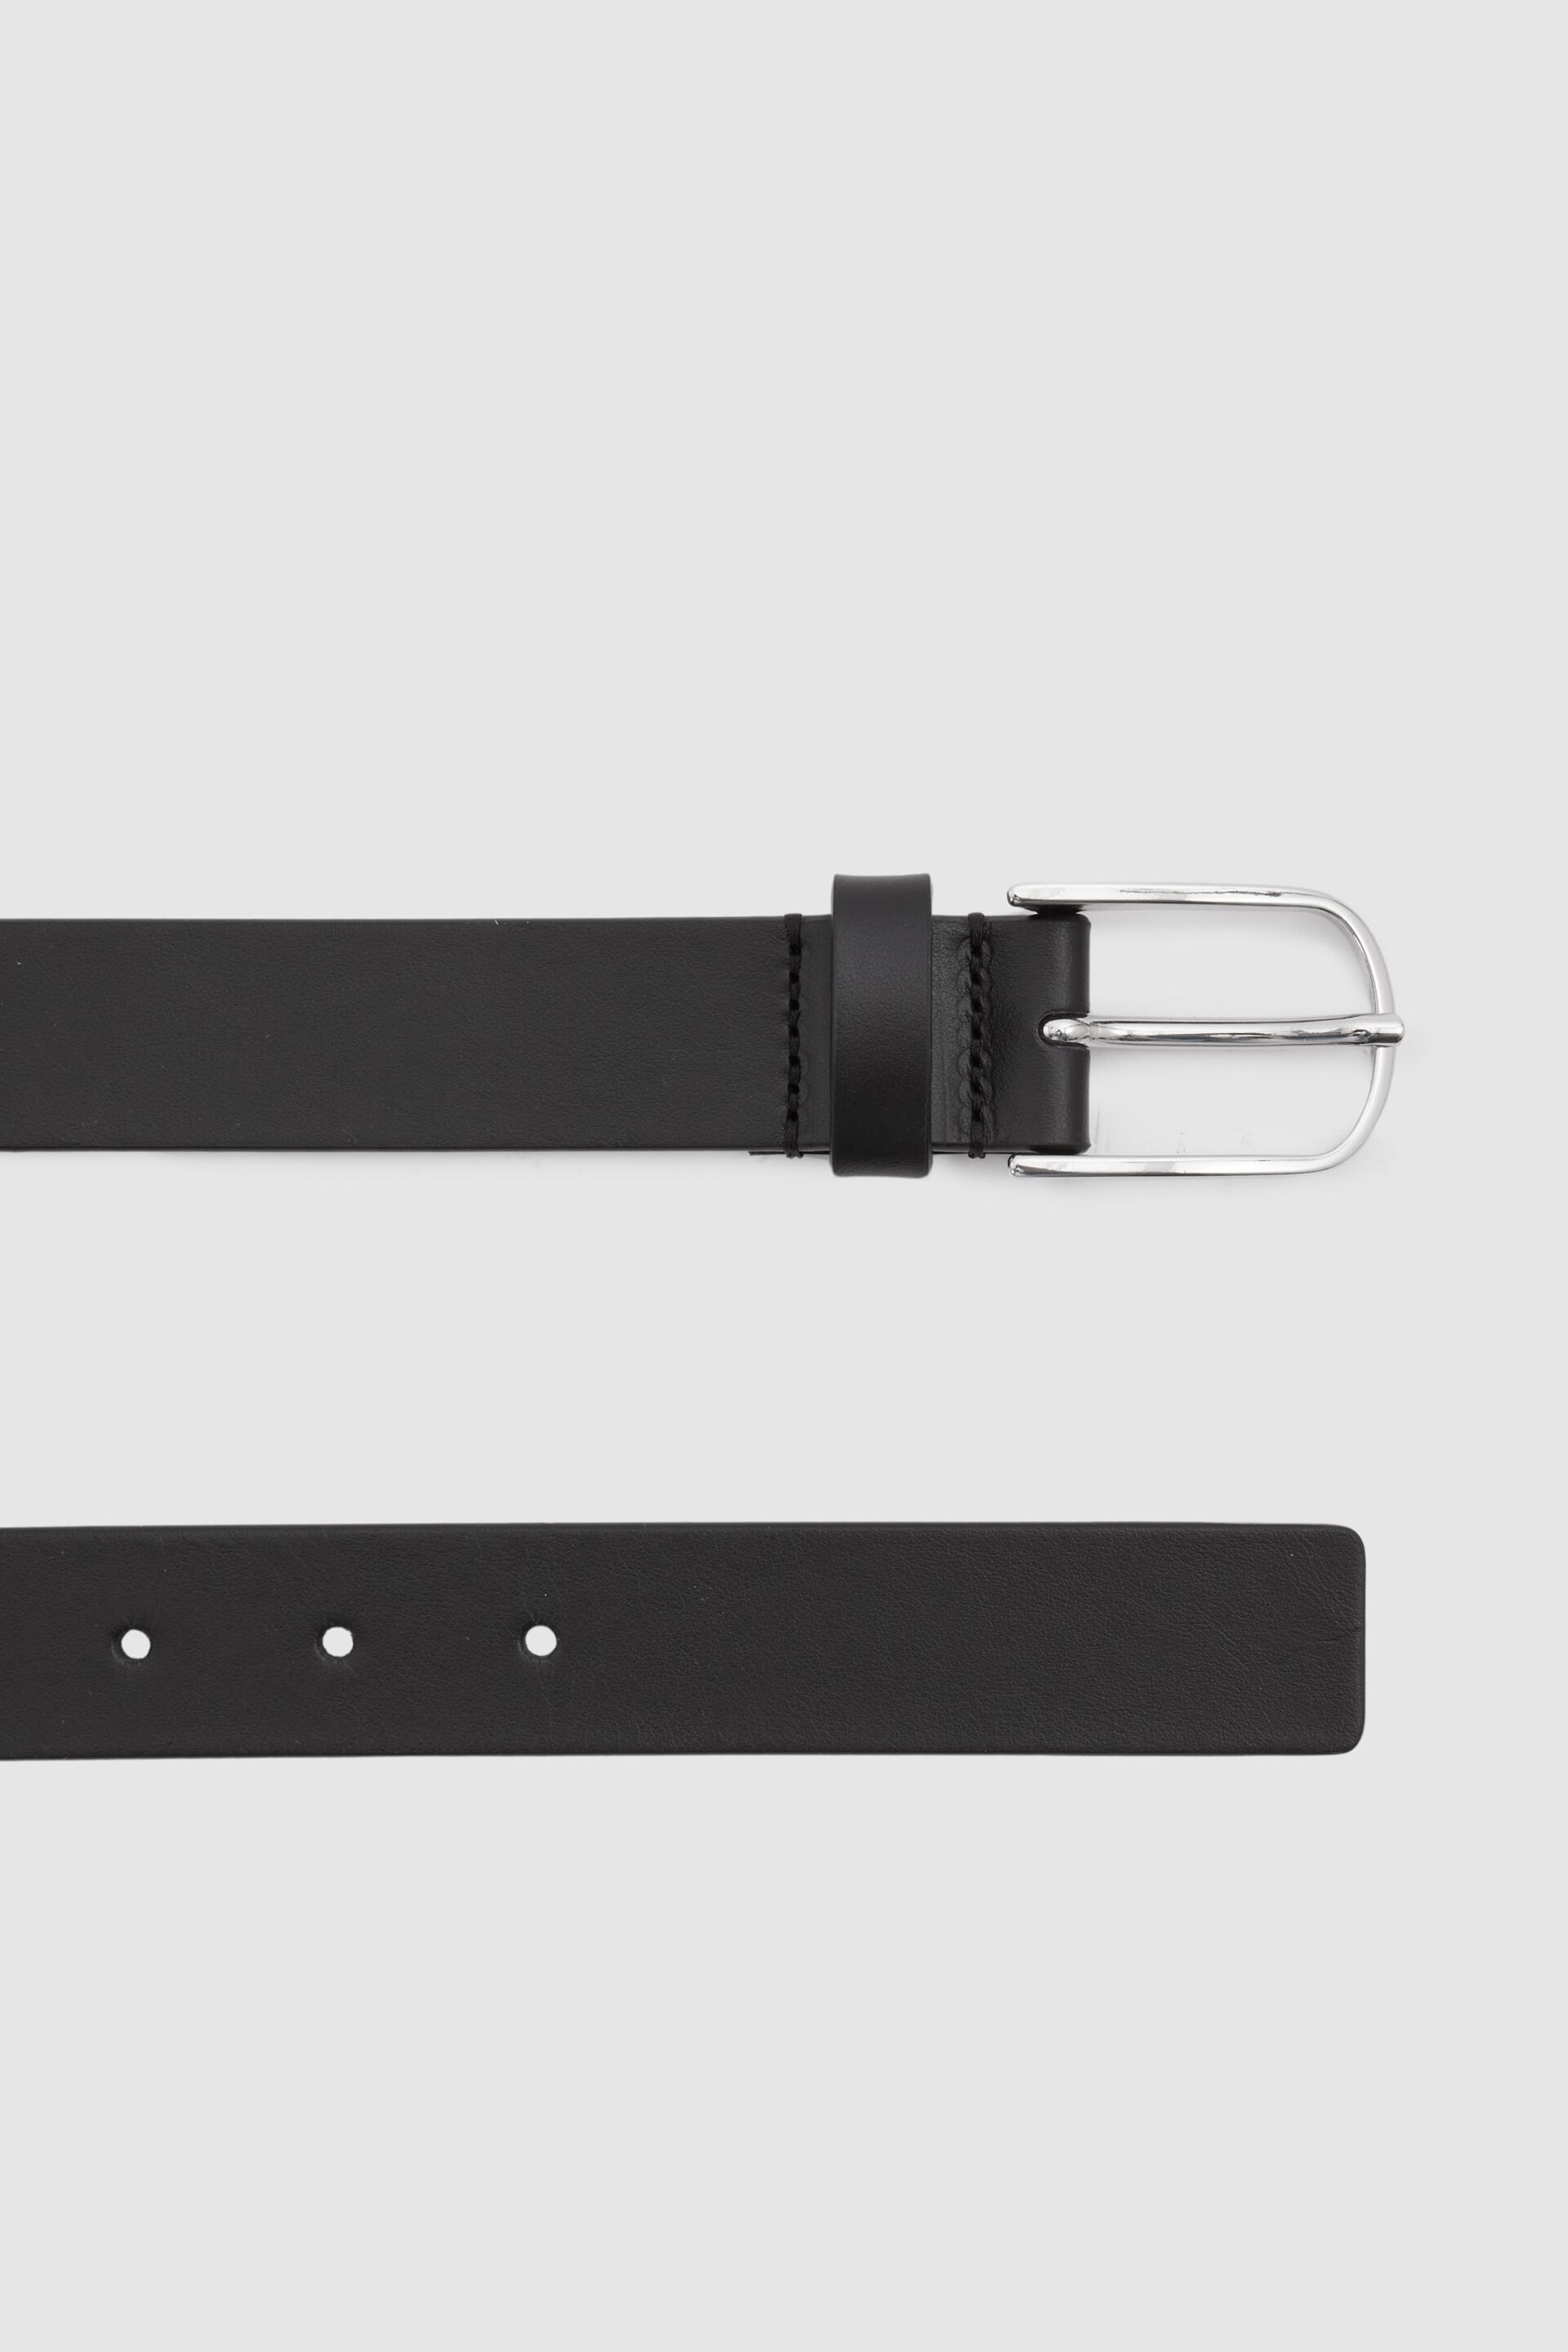 Reiss Black Carrie Leather Belt - Image 3 of 4